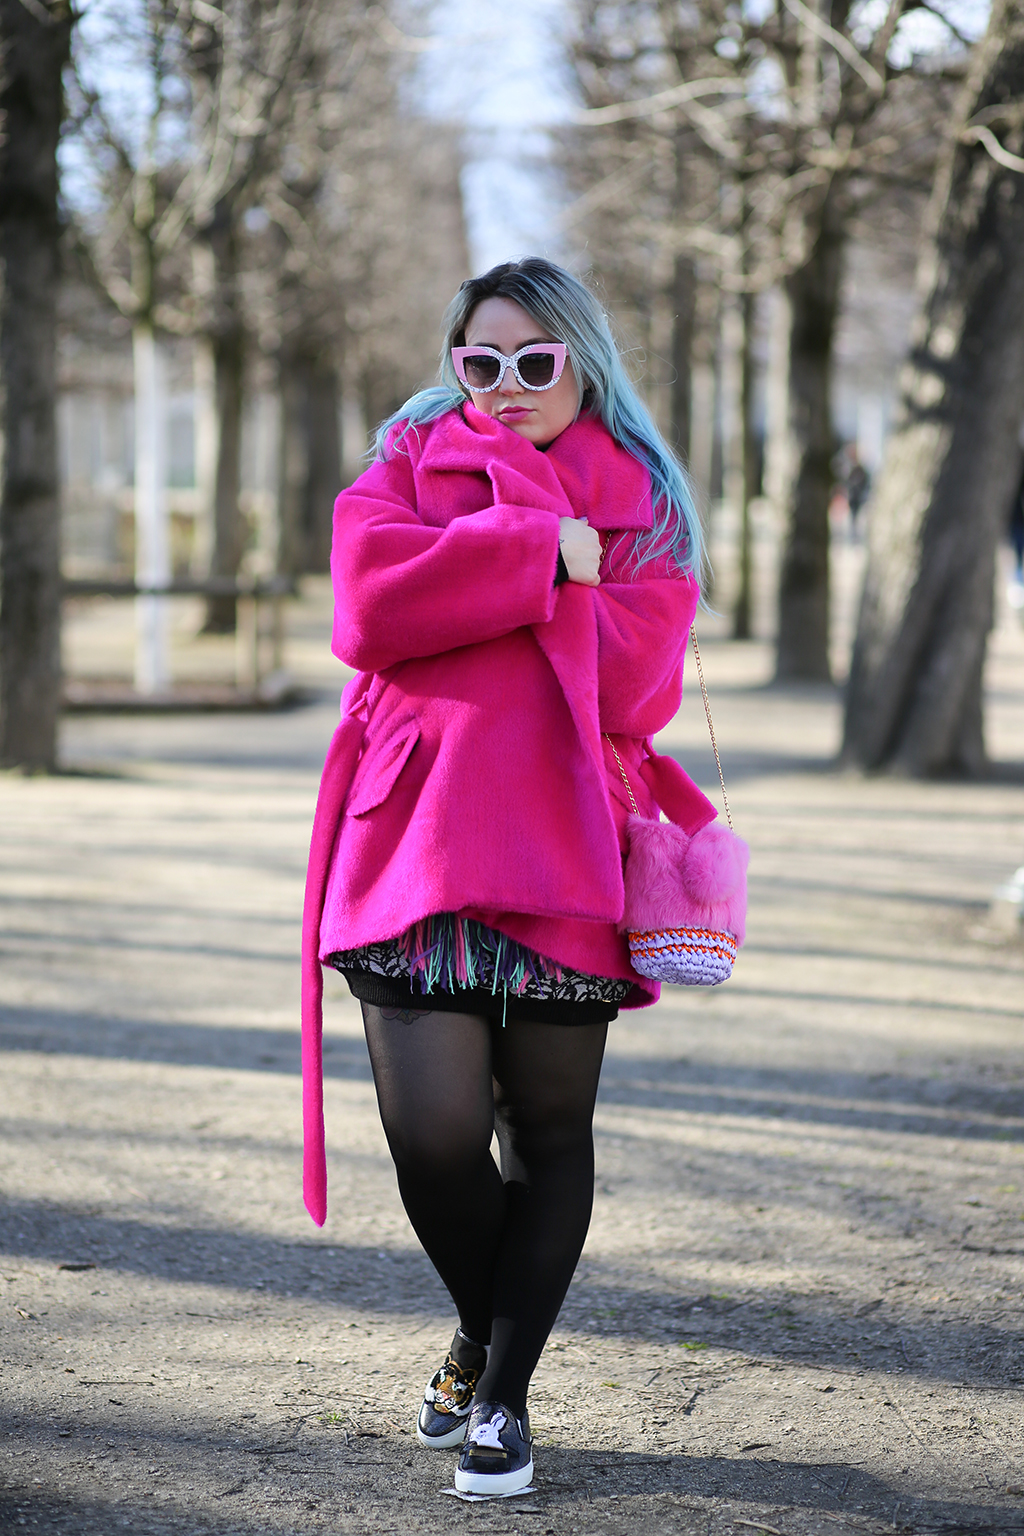 pfw premiere classe outfit streetstyle